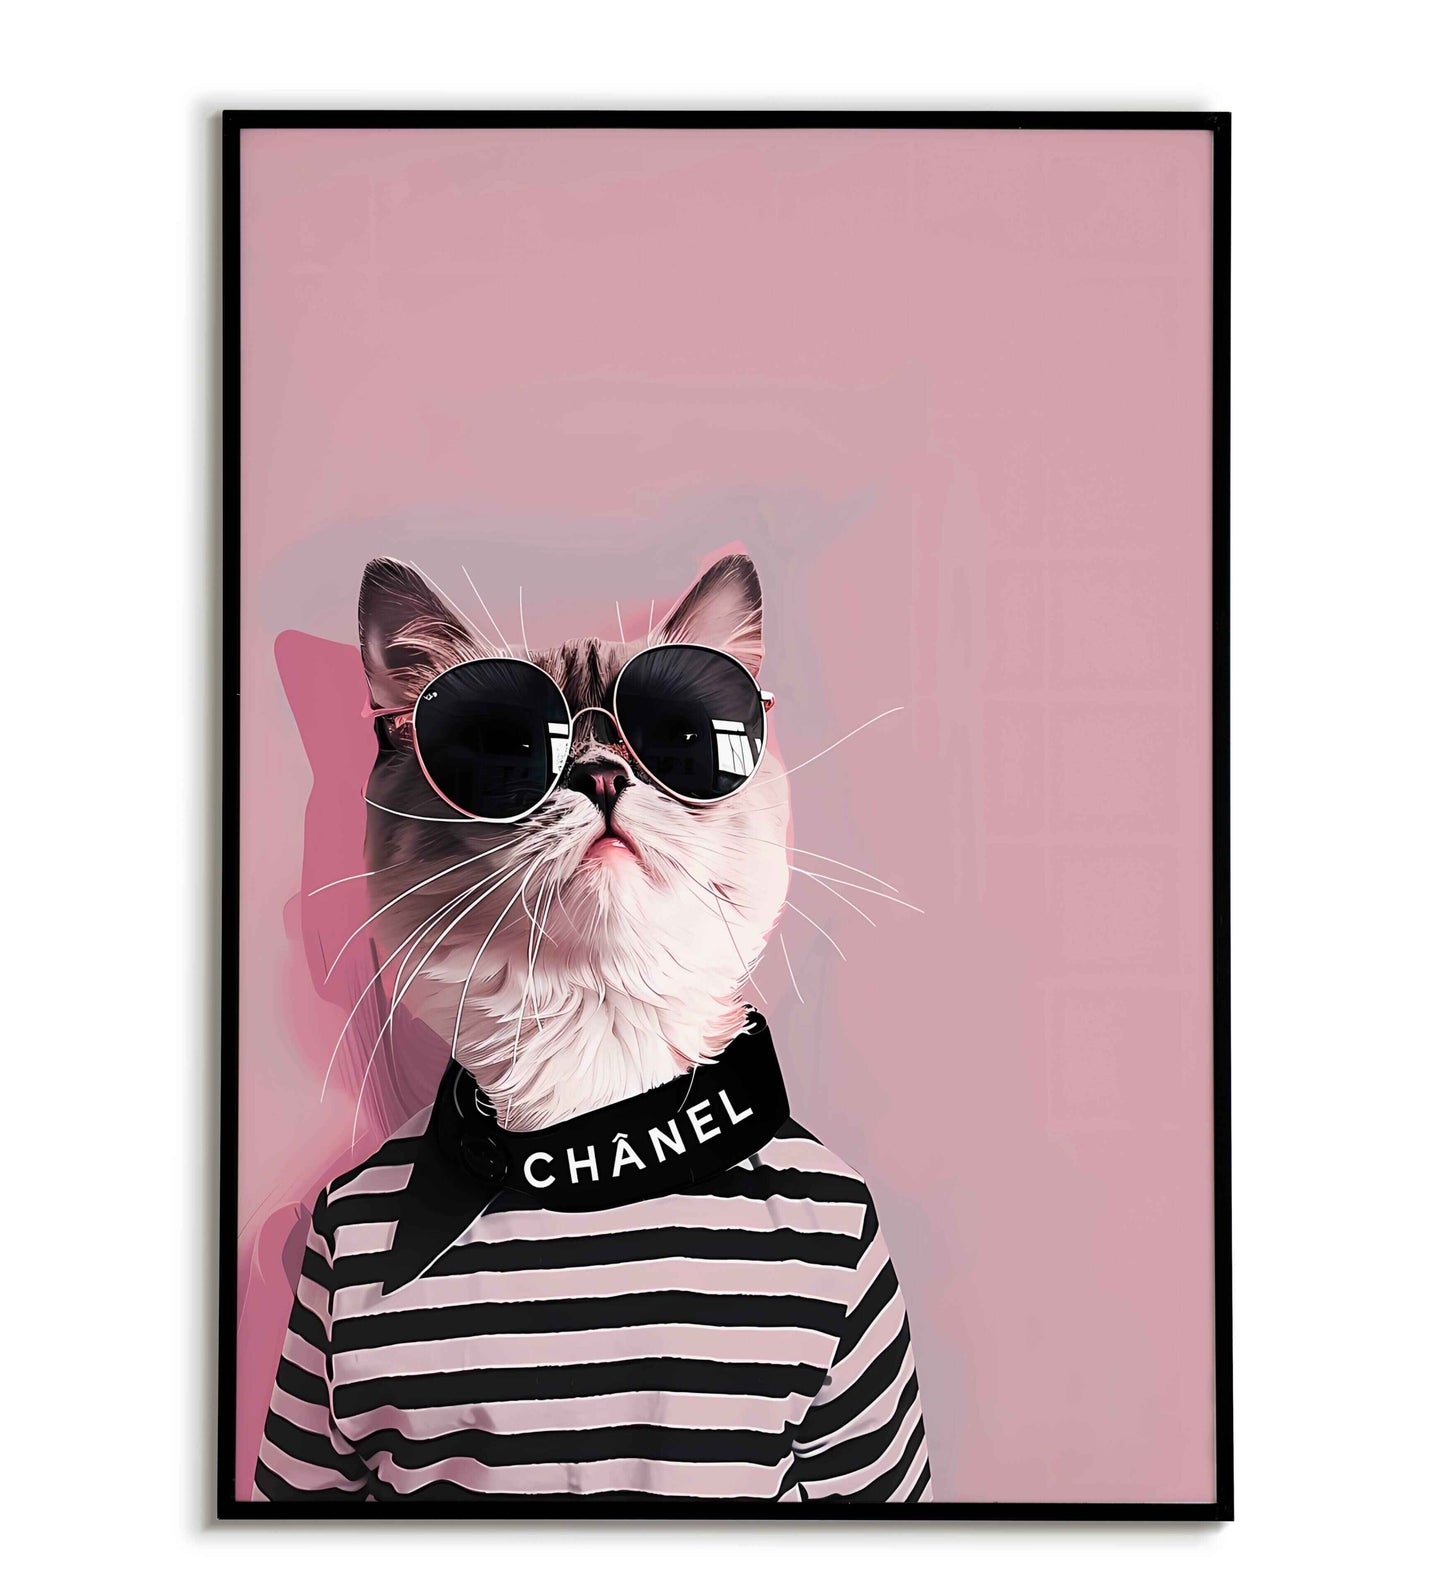 Cool Kitten(1 of 2) printable poster. Available for purchase as a physical poster or digital download.